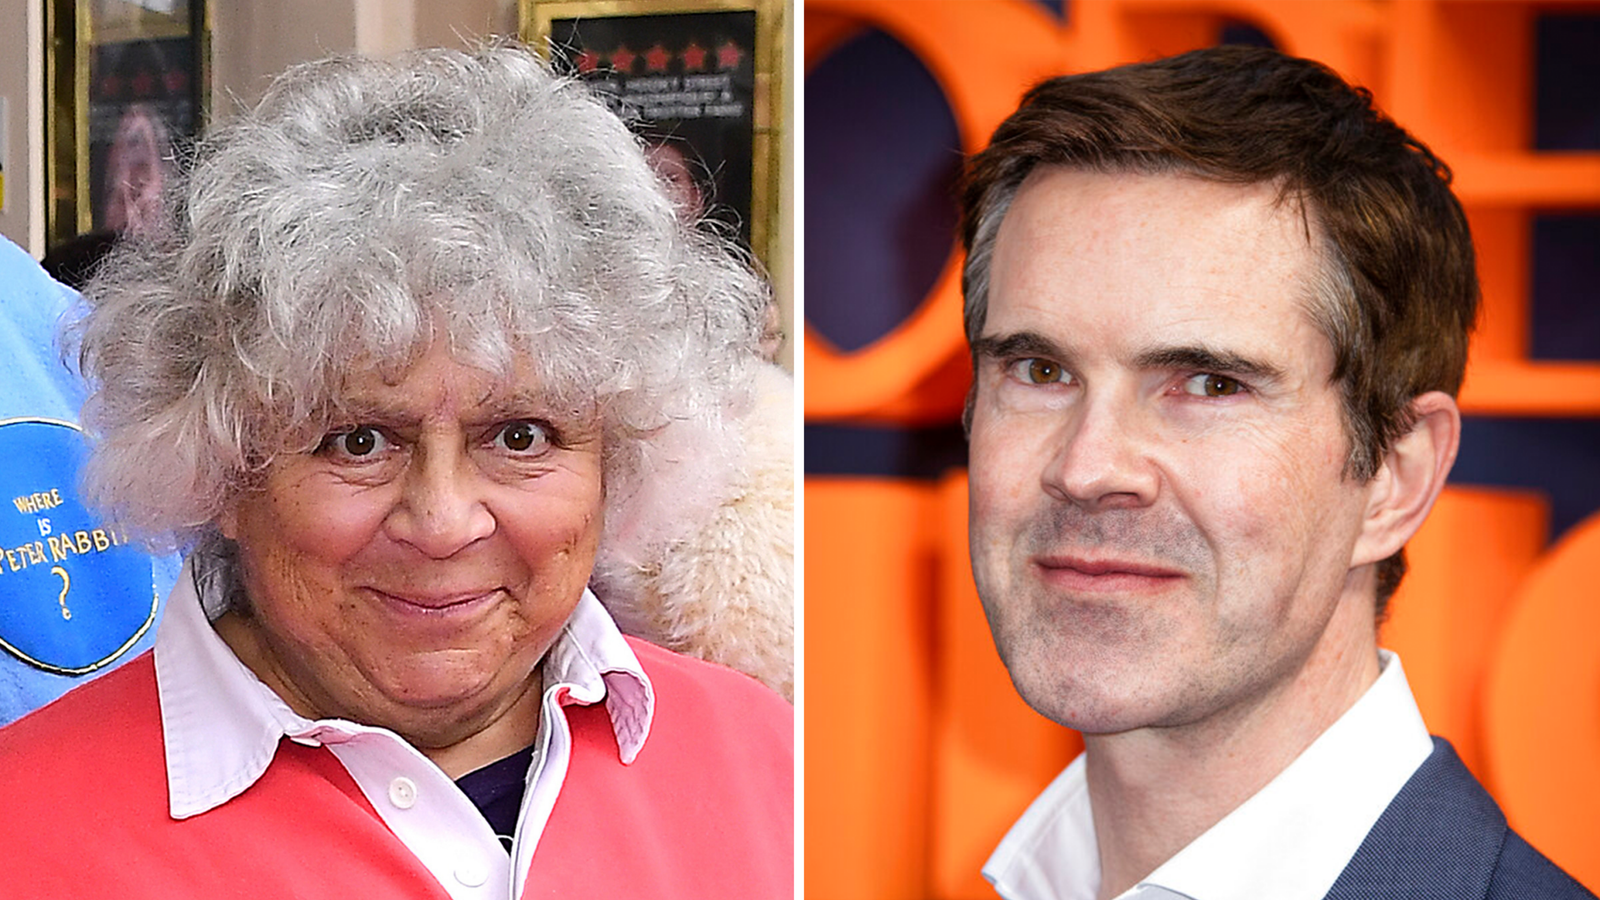 Miriam Margolyes and Jimmy Carr among acts affected after crumbling concrete forces theatre closures